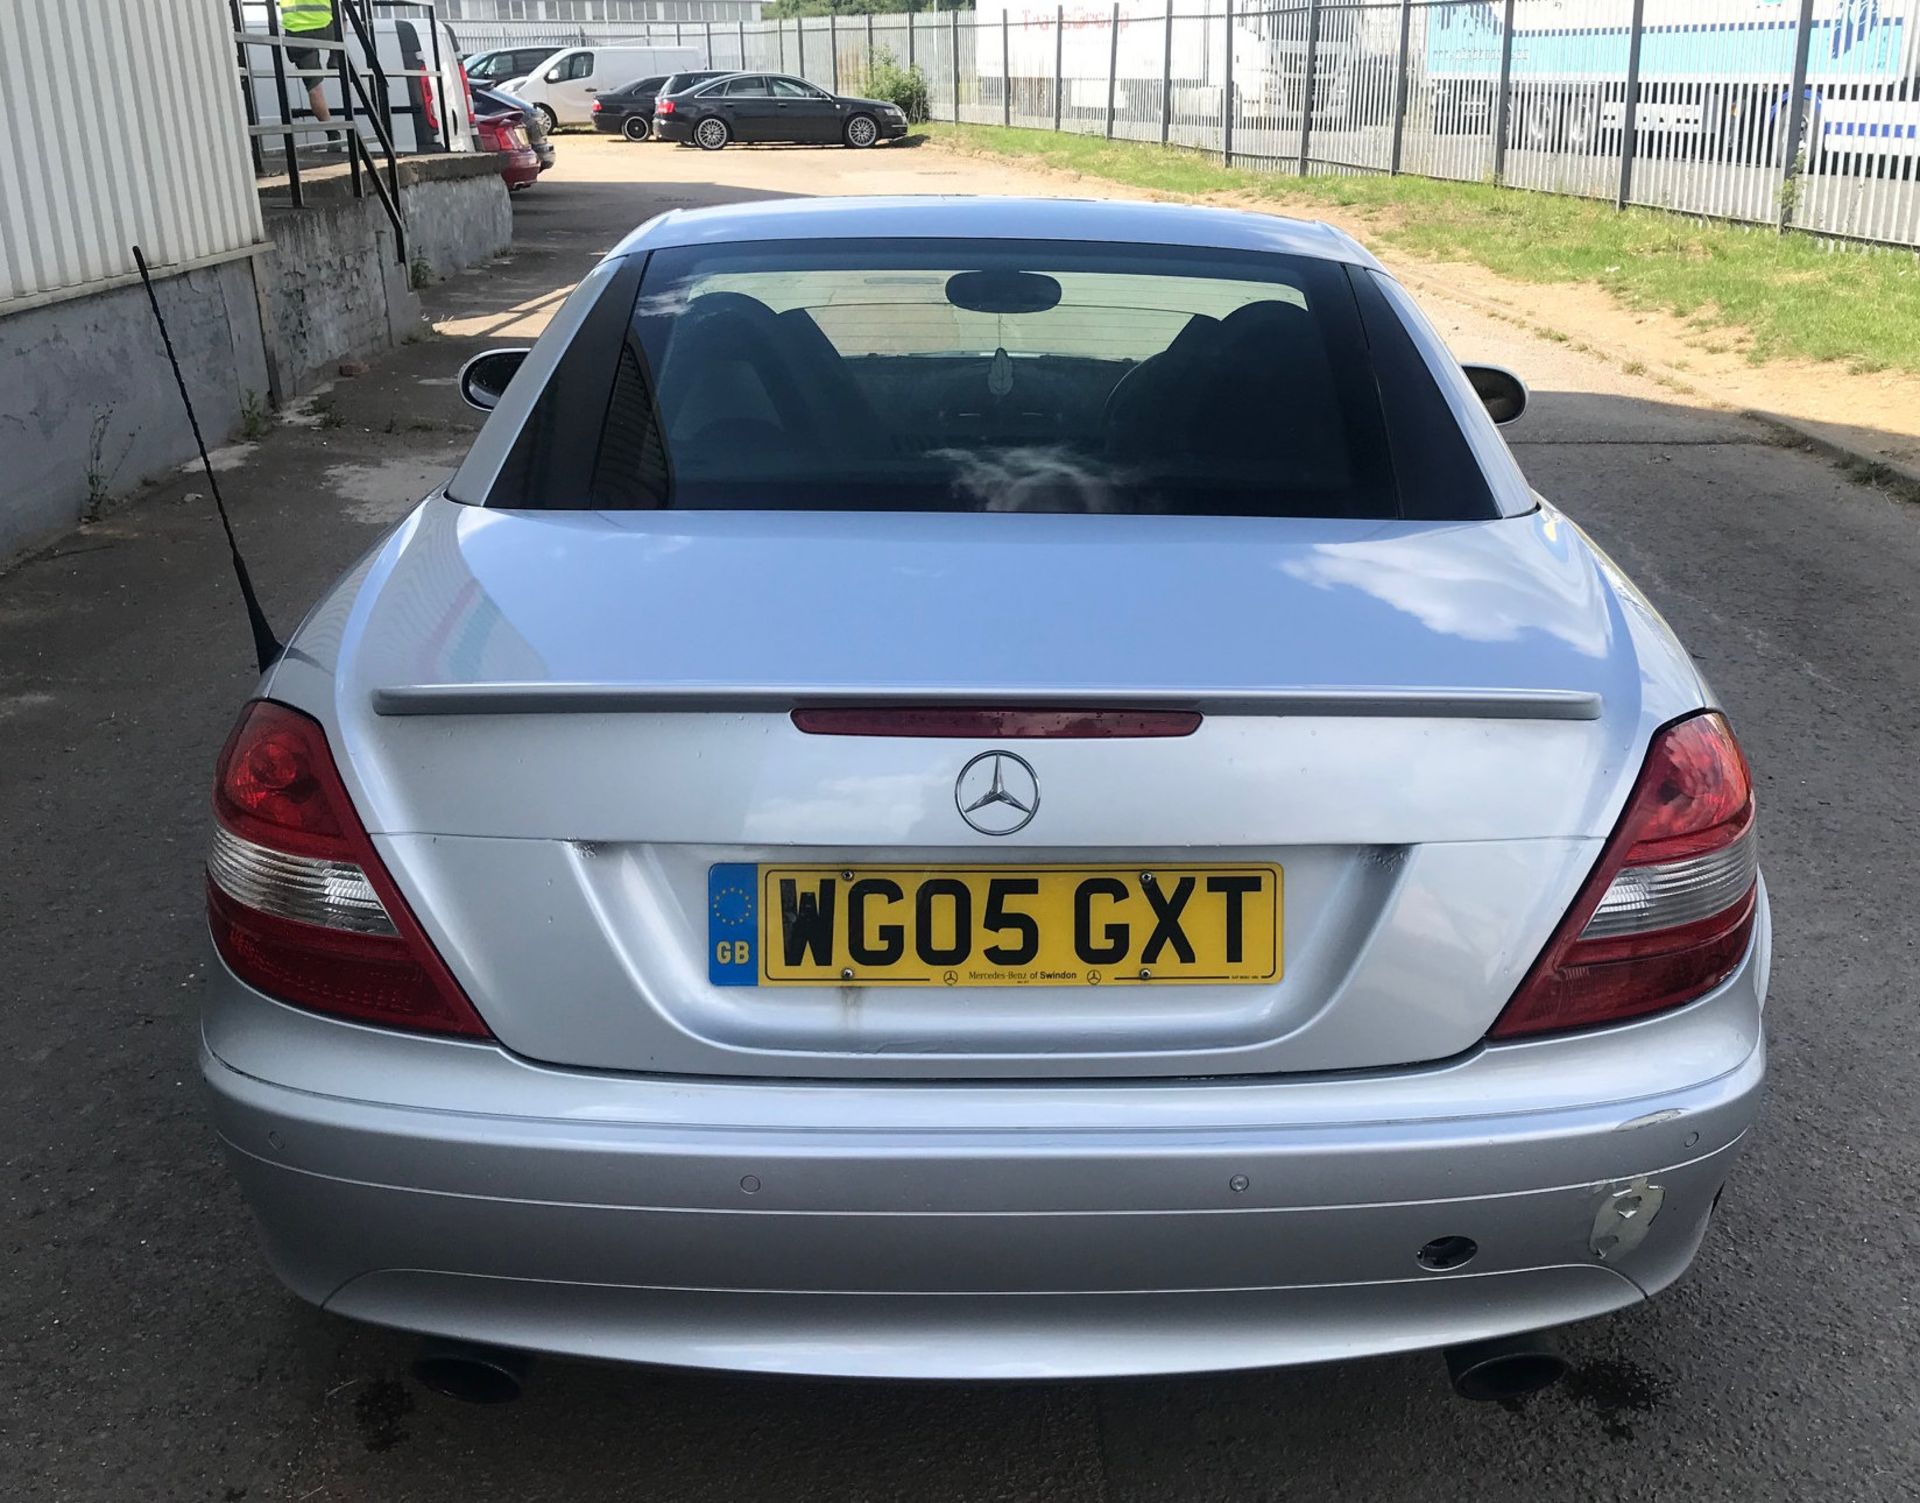 2005 Mercedes SLK 350 2 Dr Convertible - CL505 - NO VAT ON THE HAMMER - Location: Corby, N - Image 5 of 11